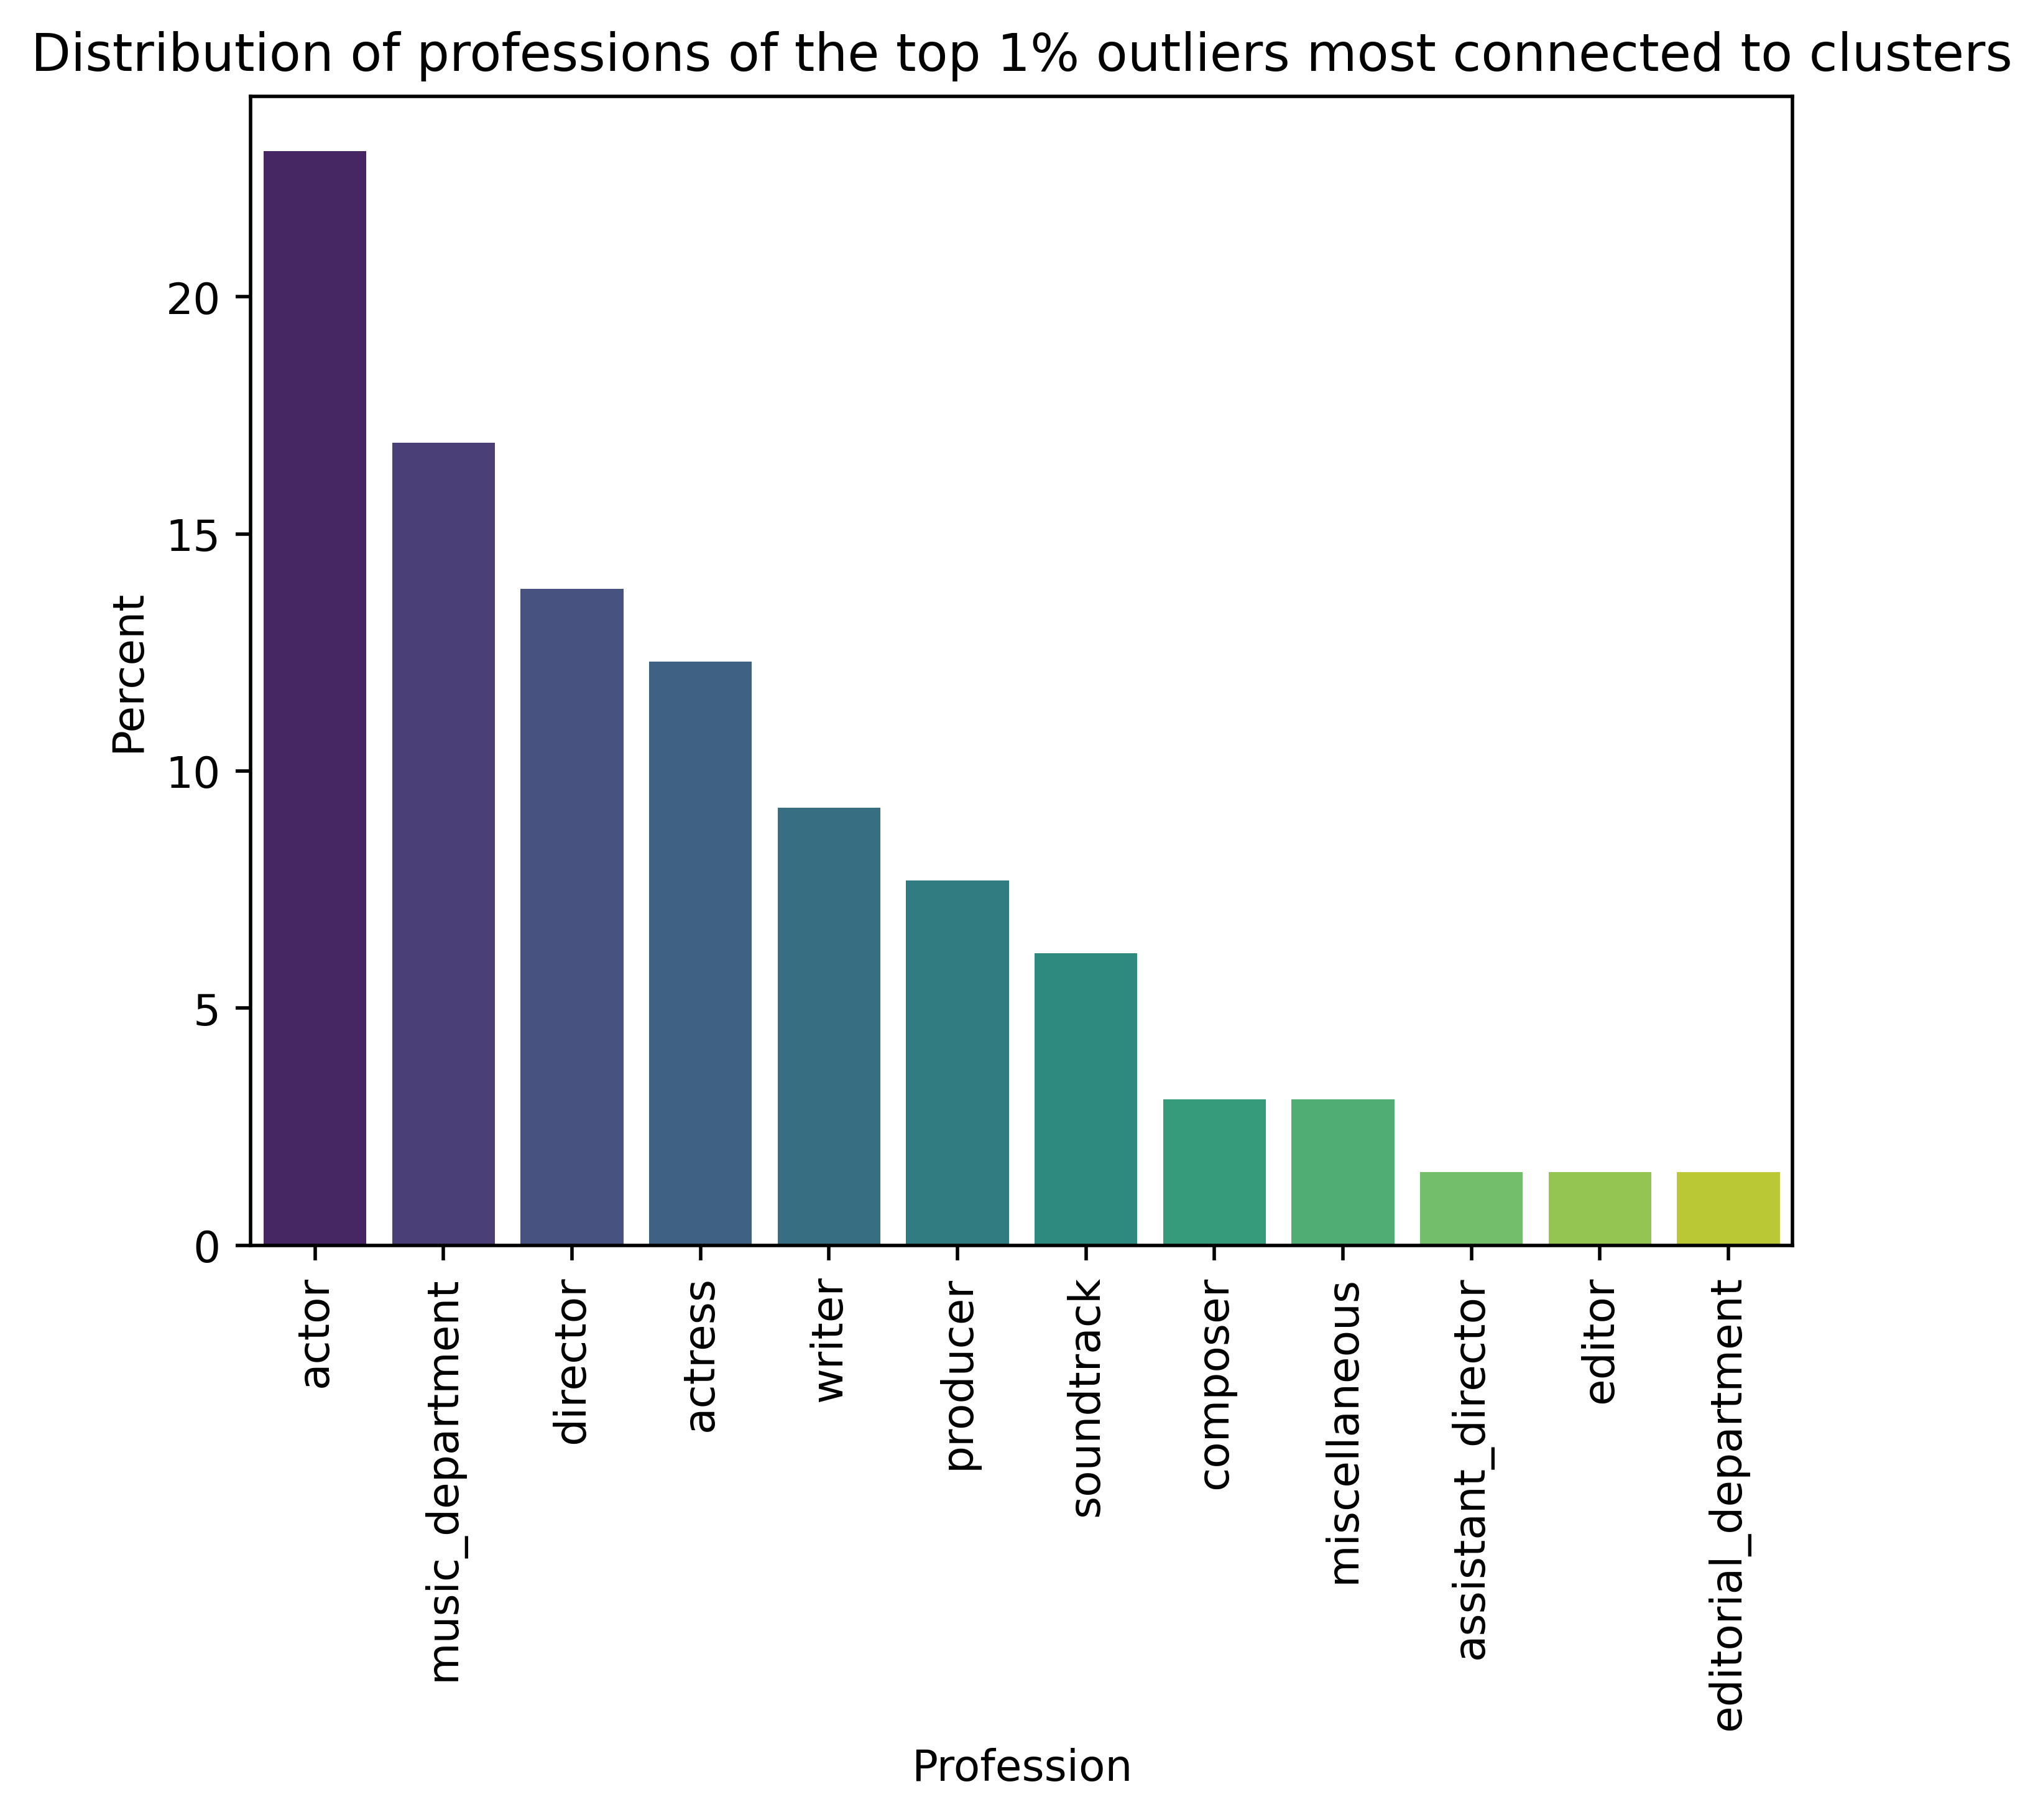 Outlier Professions